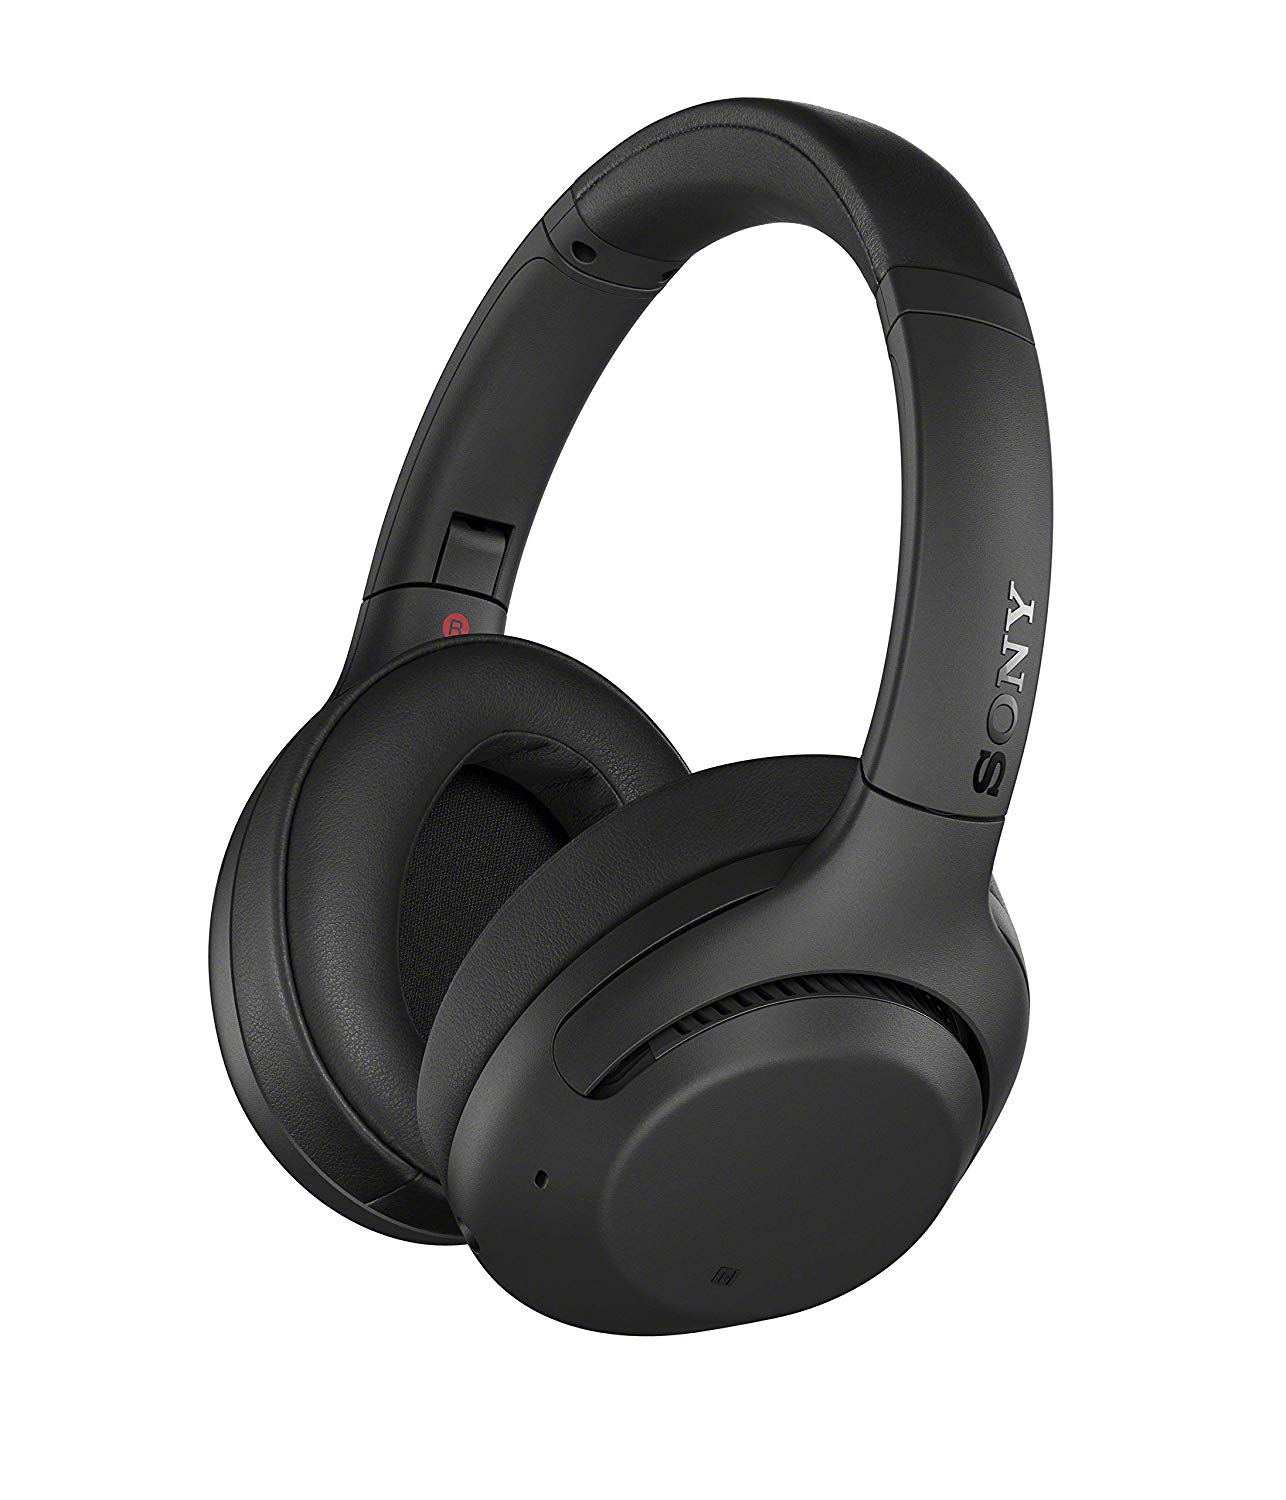 Top 8 Best Sony Noise Cancelling Headphones in 2021 - Reviews and Comparison